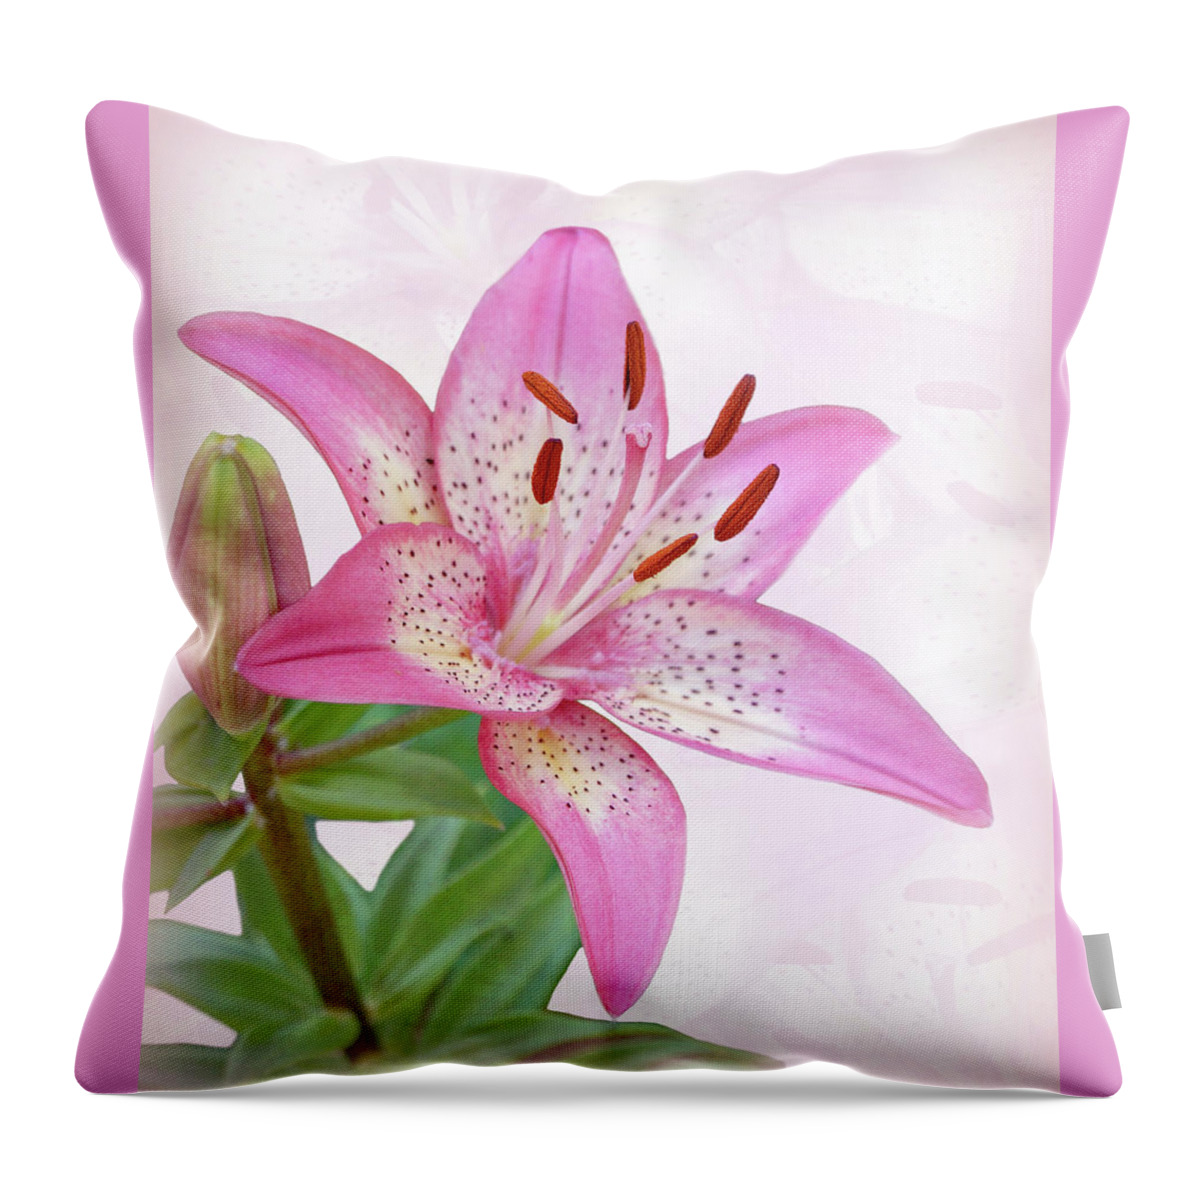 Lily Throw Pillow featuring the photograph Asiatic Lily Trogon by Sandy Keeton